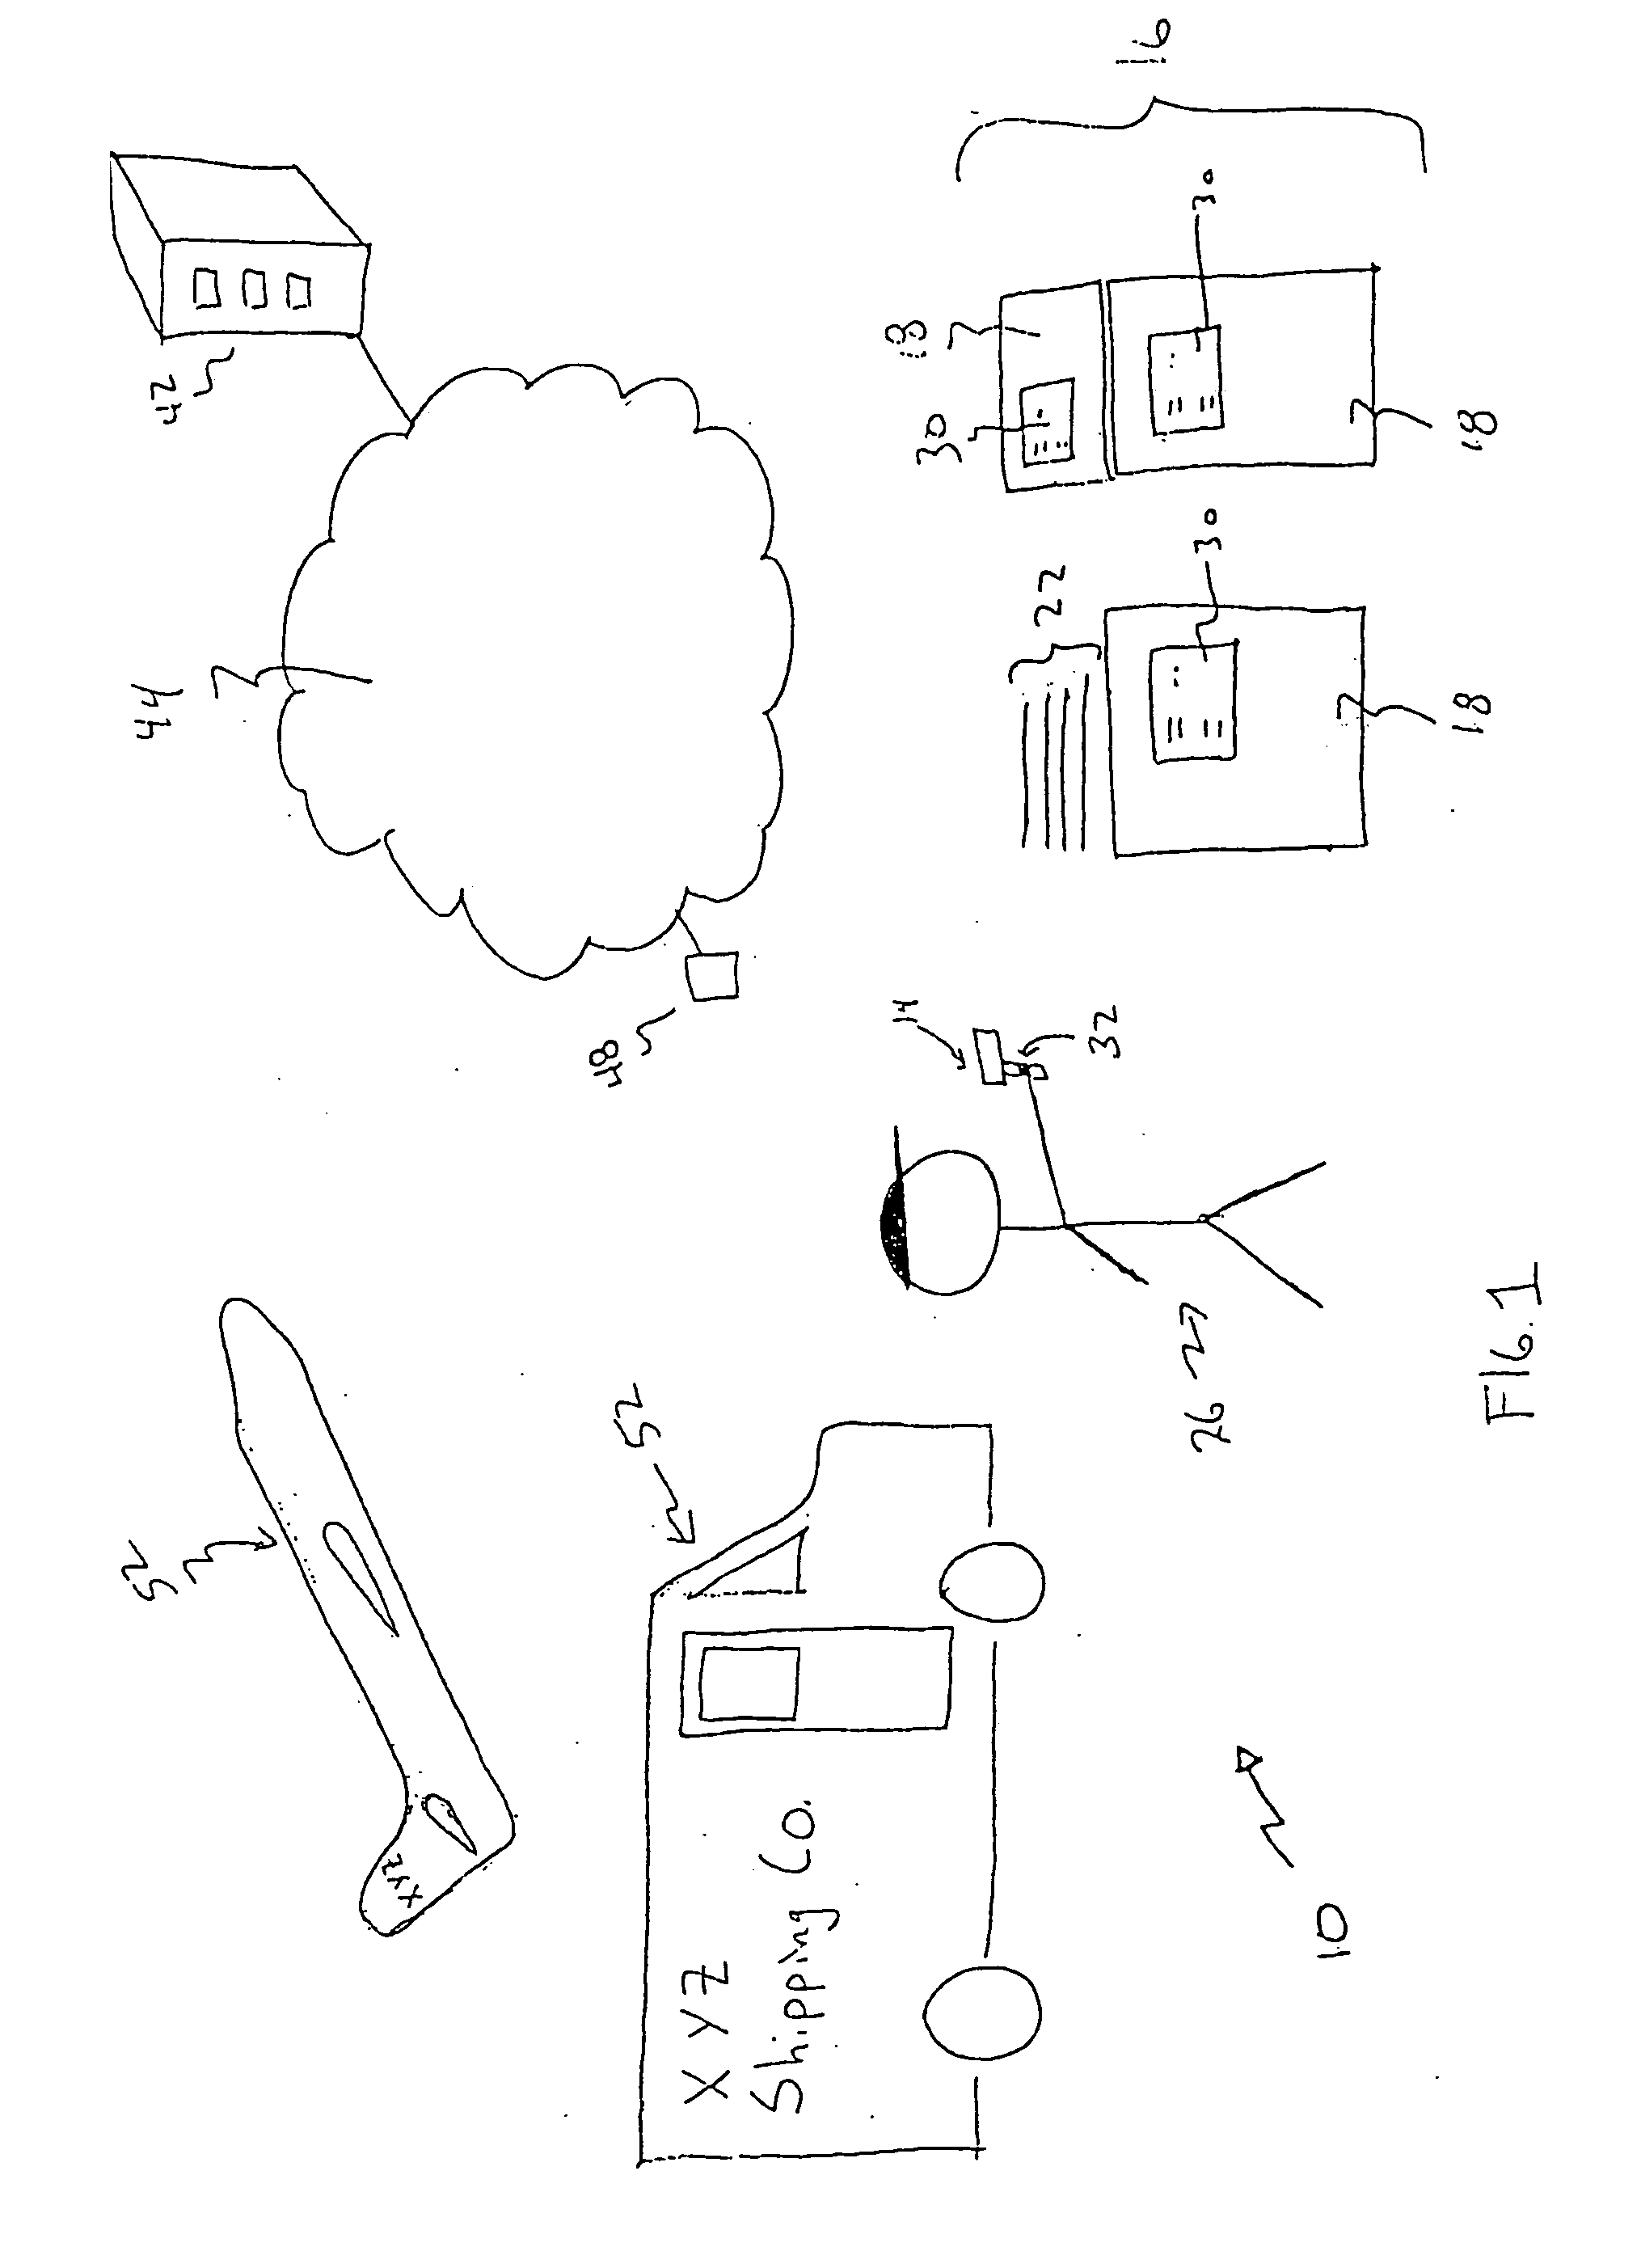 System and method to automatically discriminate between a signature and a barcode